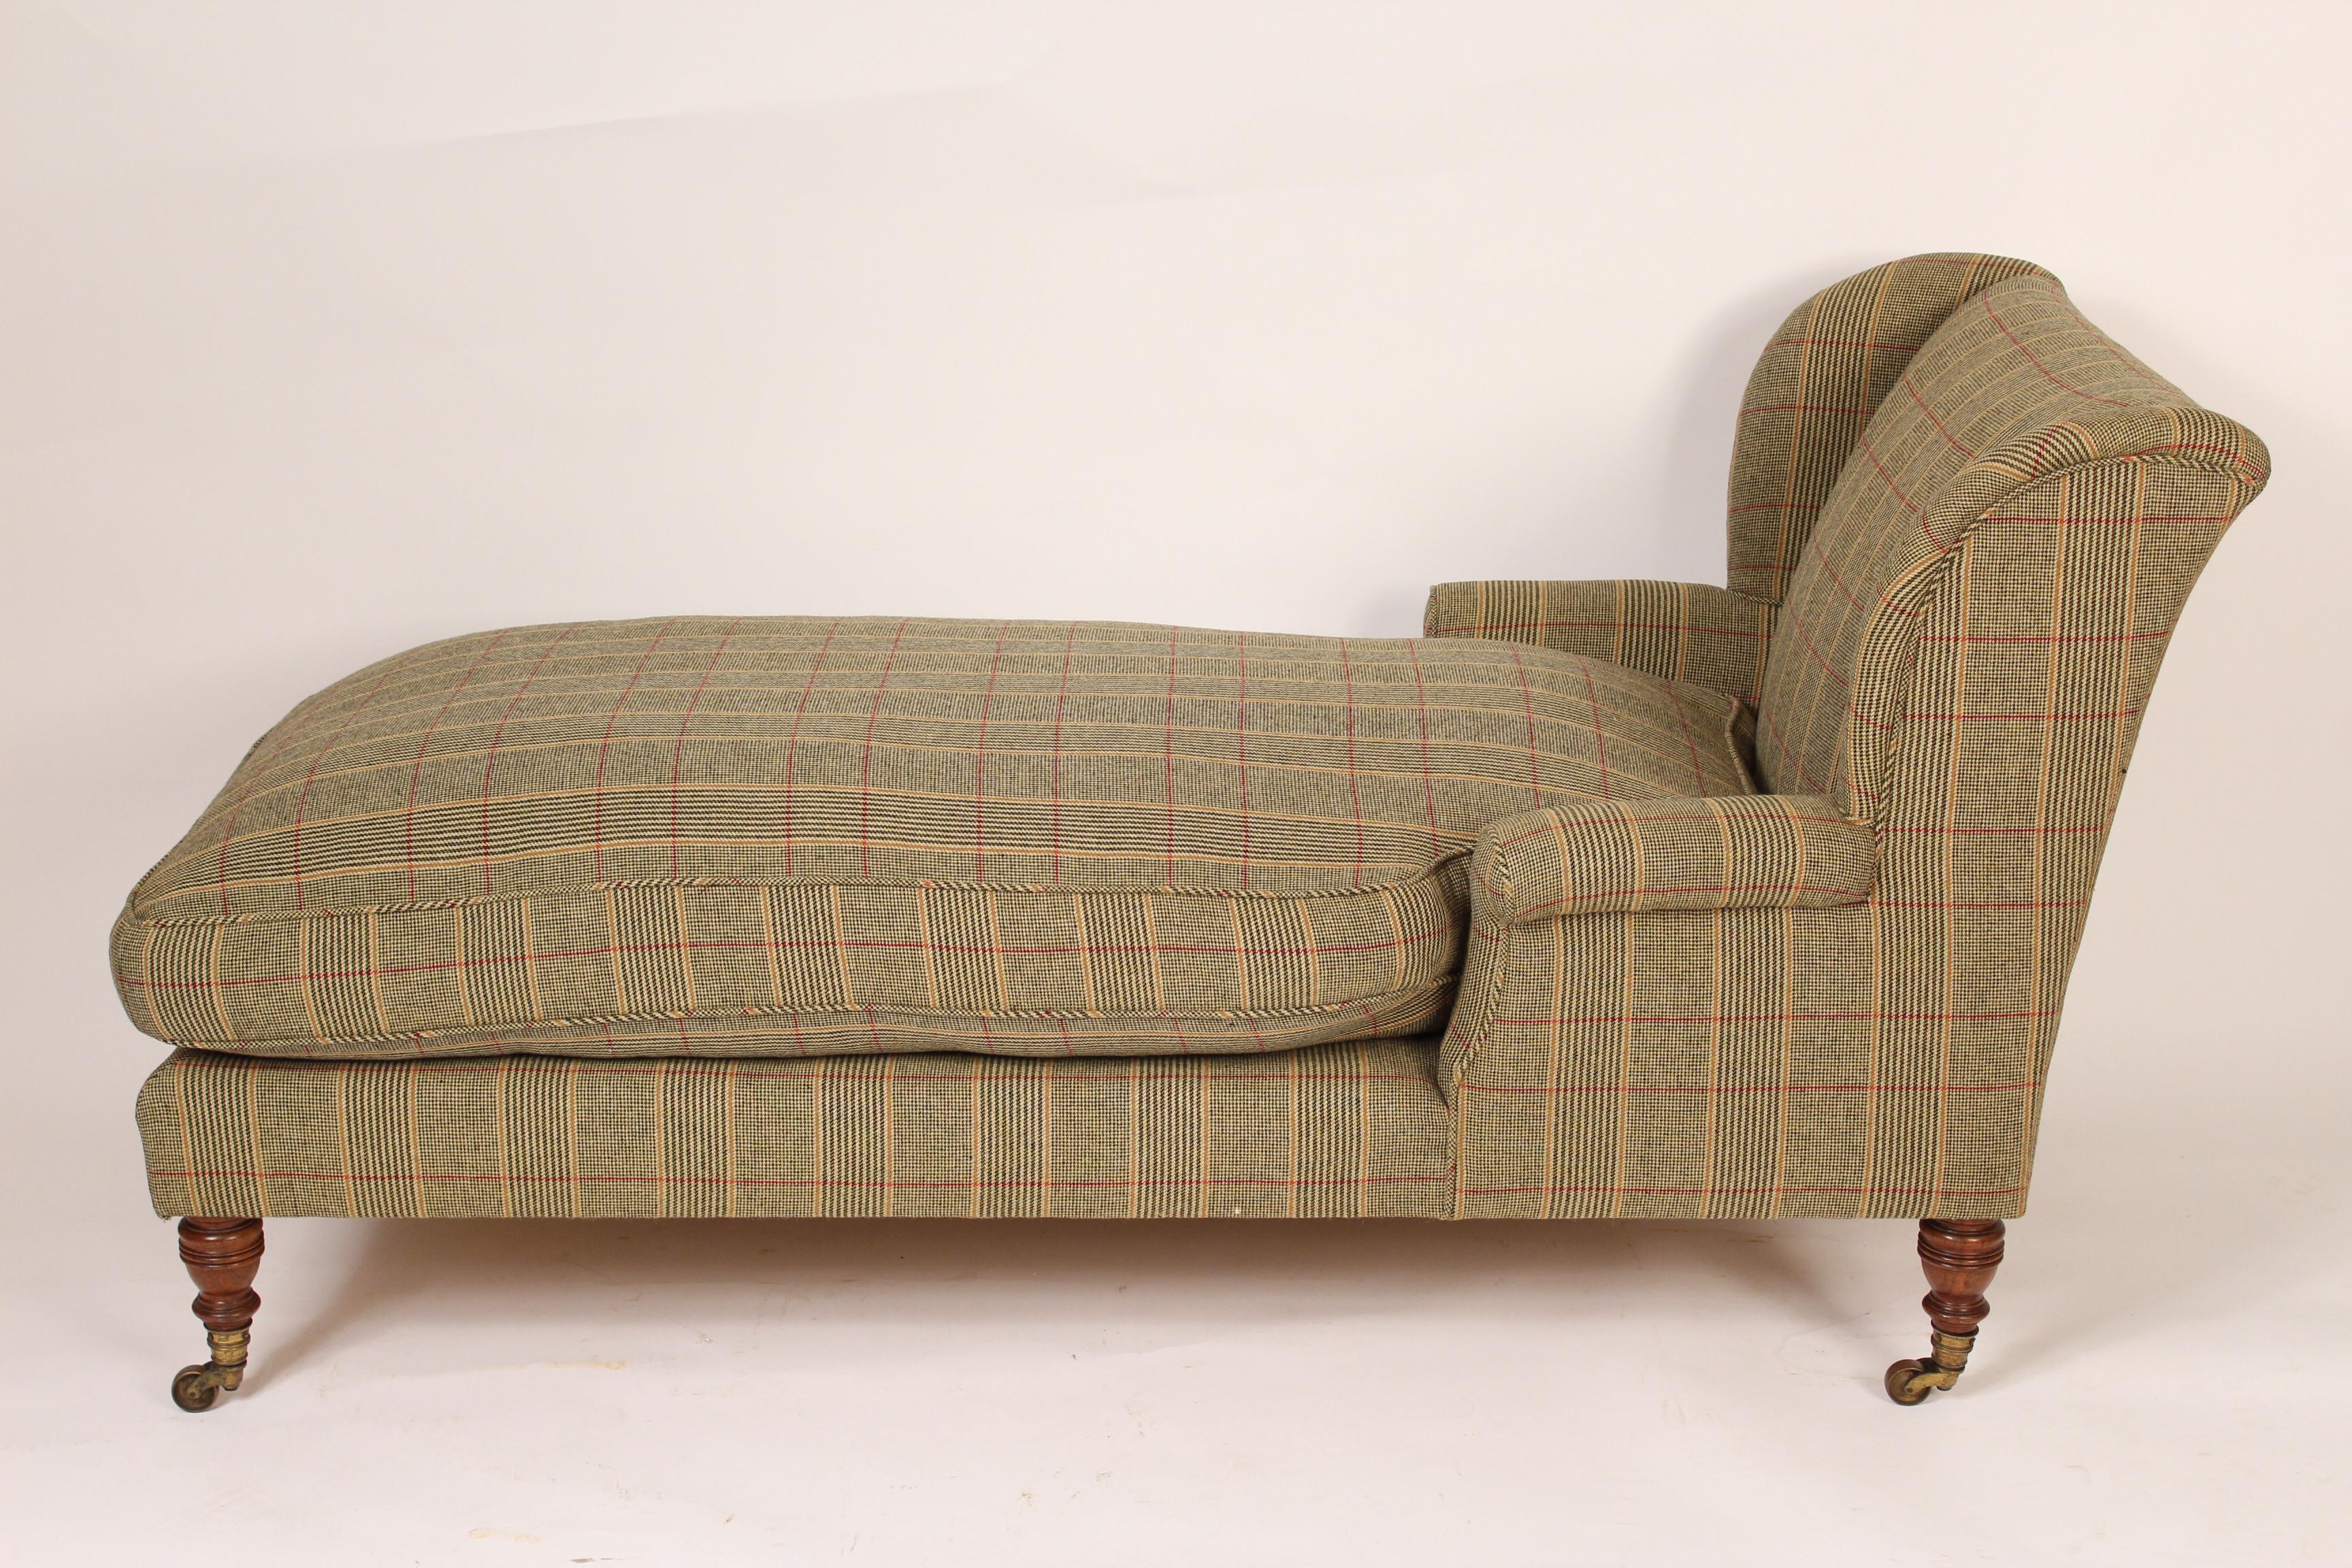 English Antique William iv Style Chaise Lounge by Howard & Sons